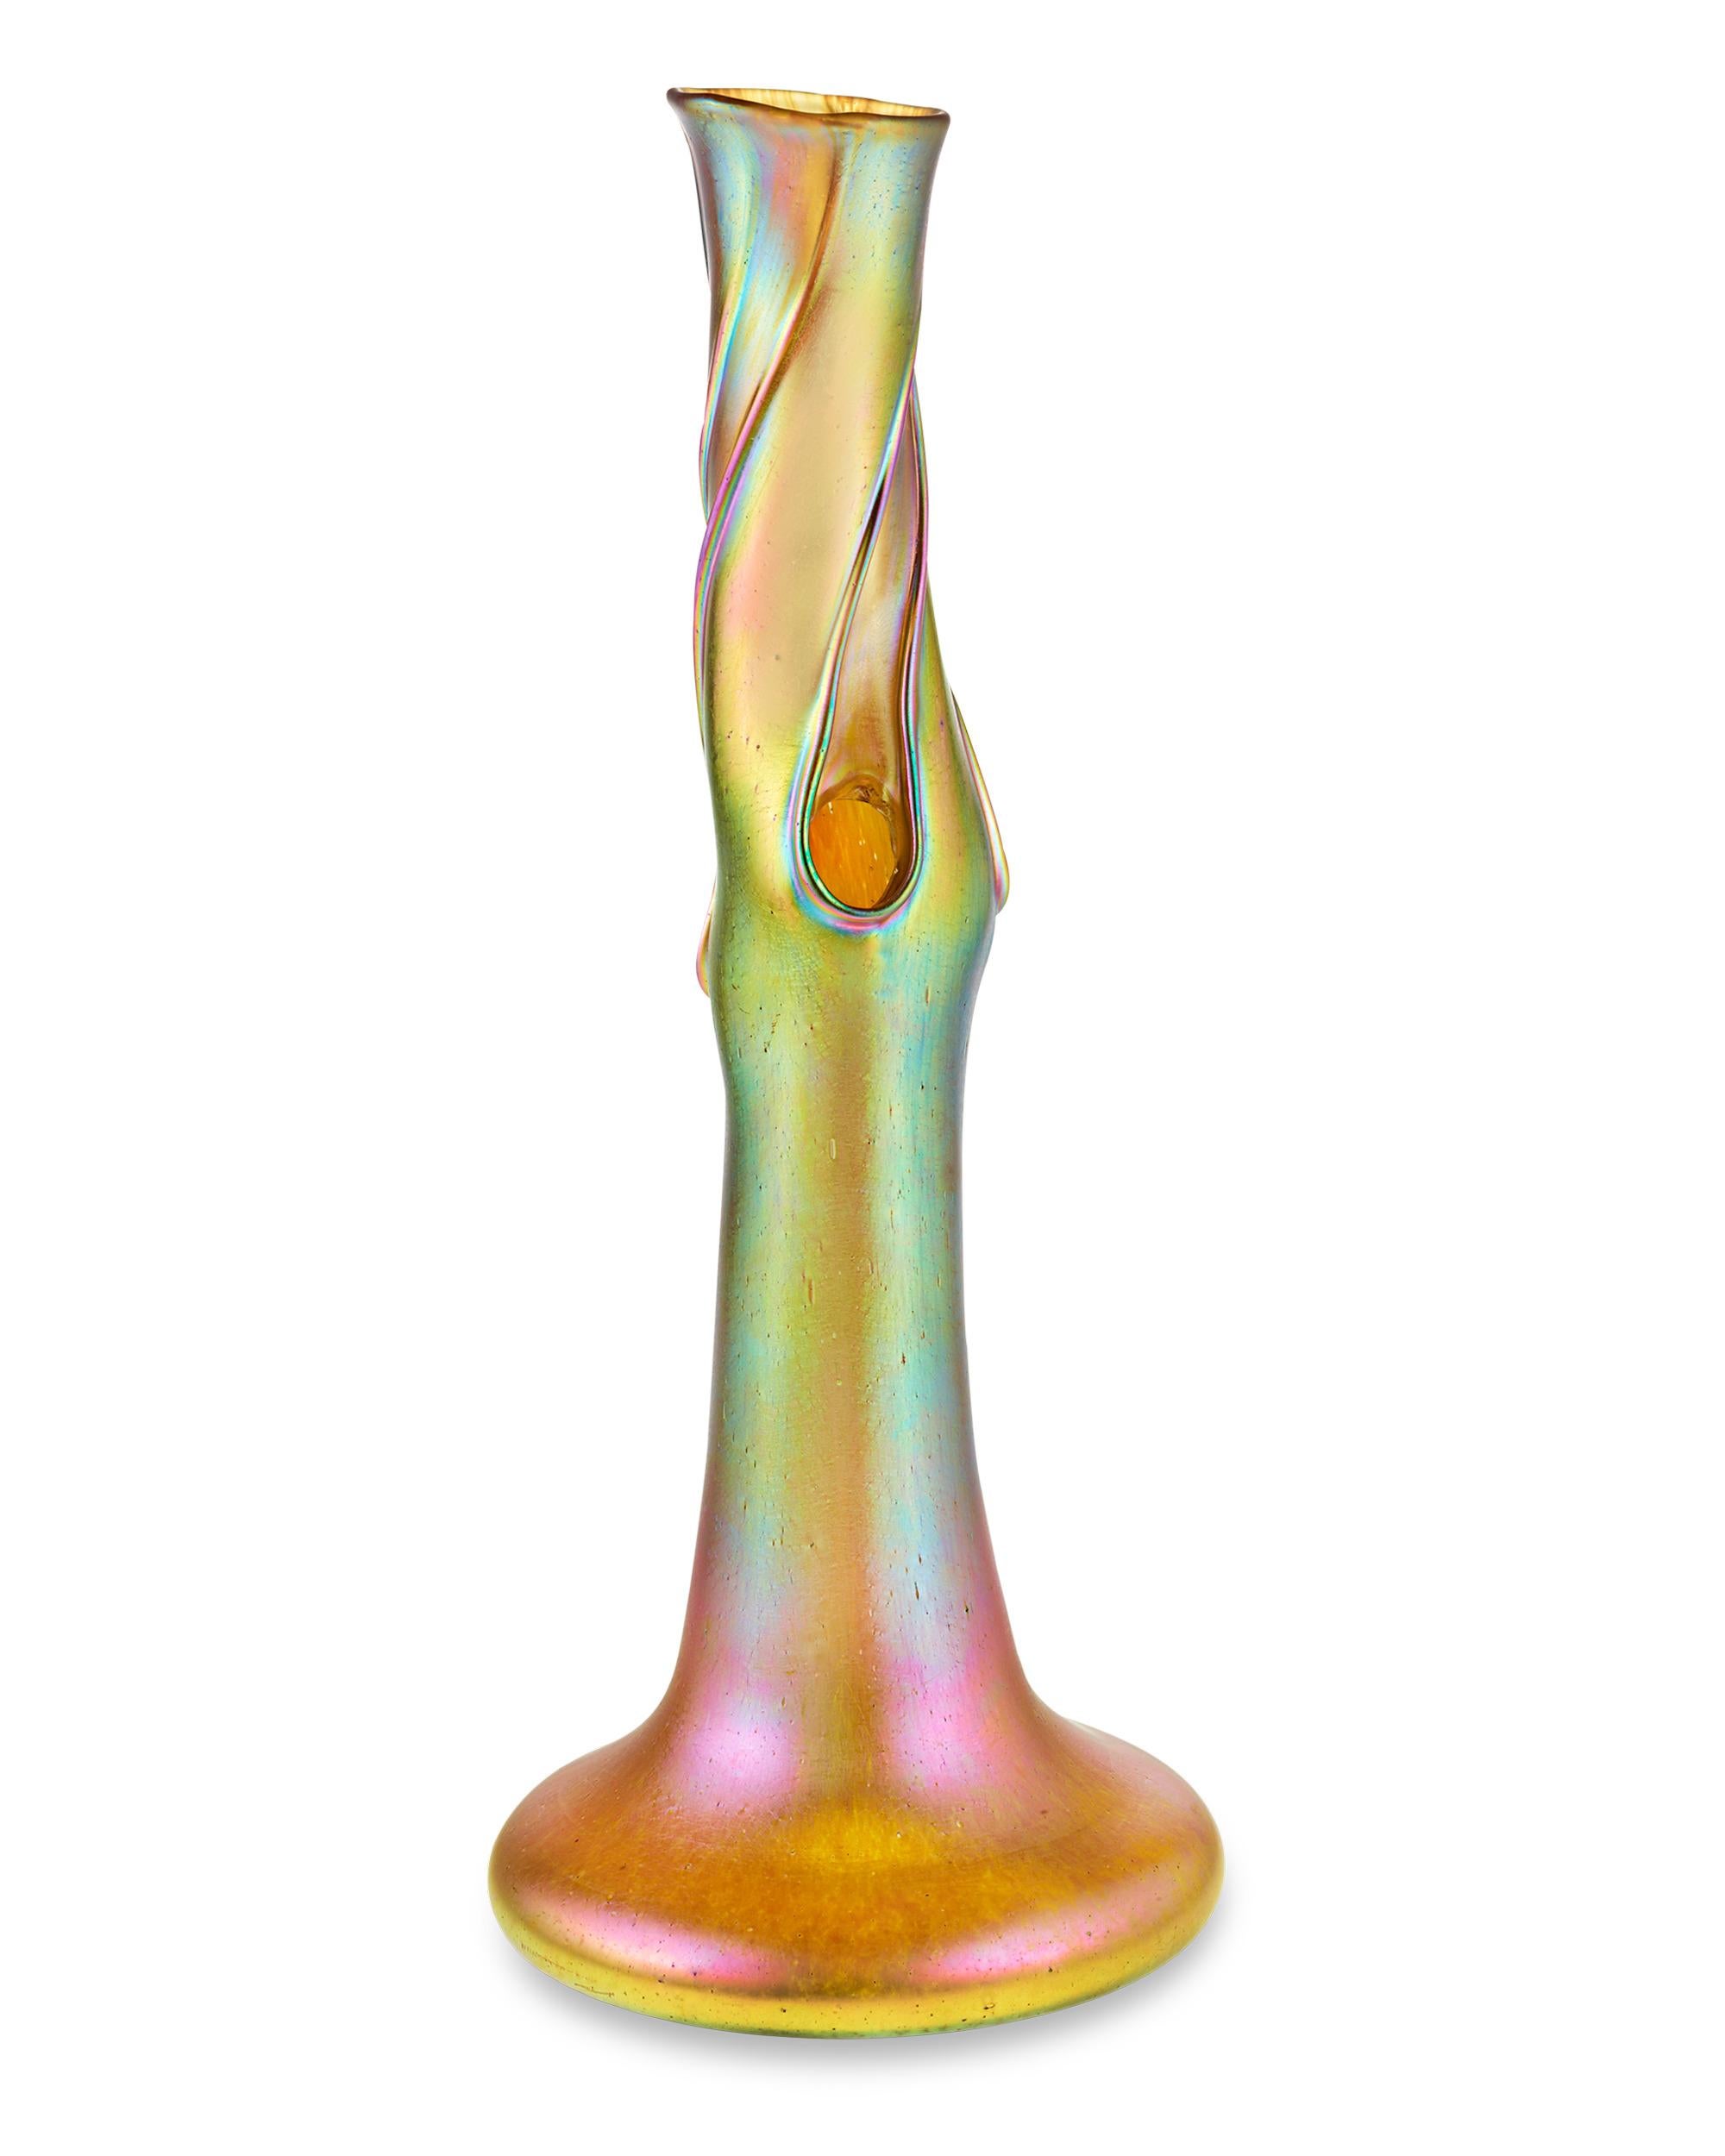 Iridescent swirls adorn this rare Candia Silberiris tree trunk vase from the renowned 19th-century art glass firm Loetz. Crafted in a sensuous, organic design with Loetz's signature luster and measuring over 16 inches in height, this vase exhibits